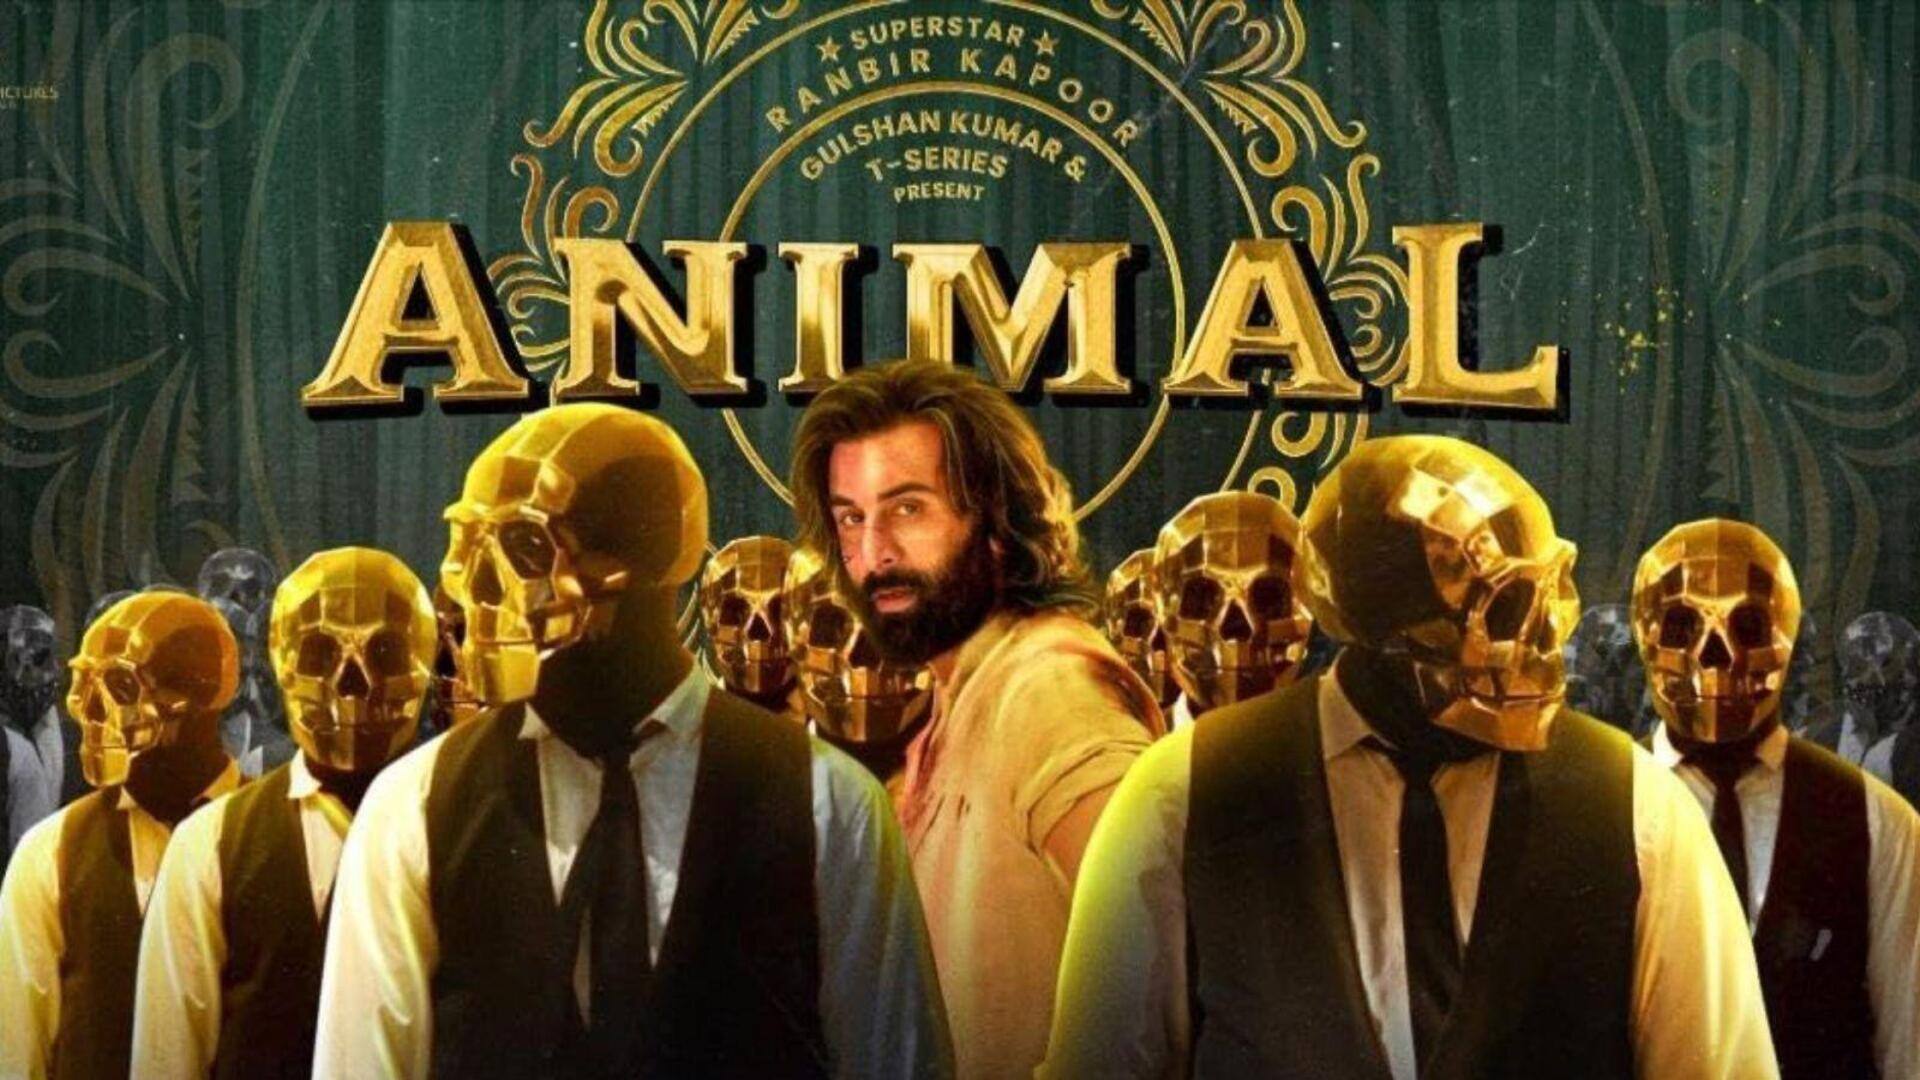 Box office collection: 'Animal' seems resilient in fifth week